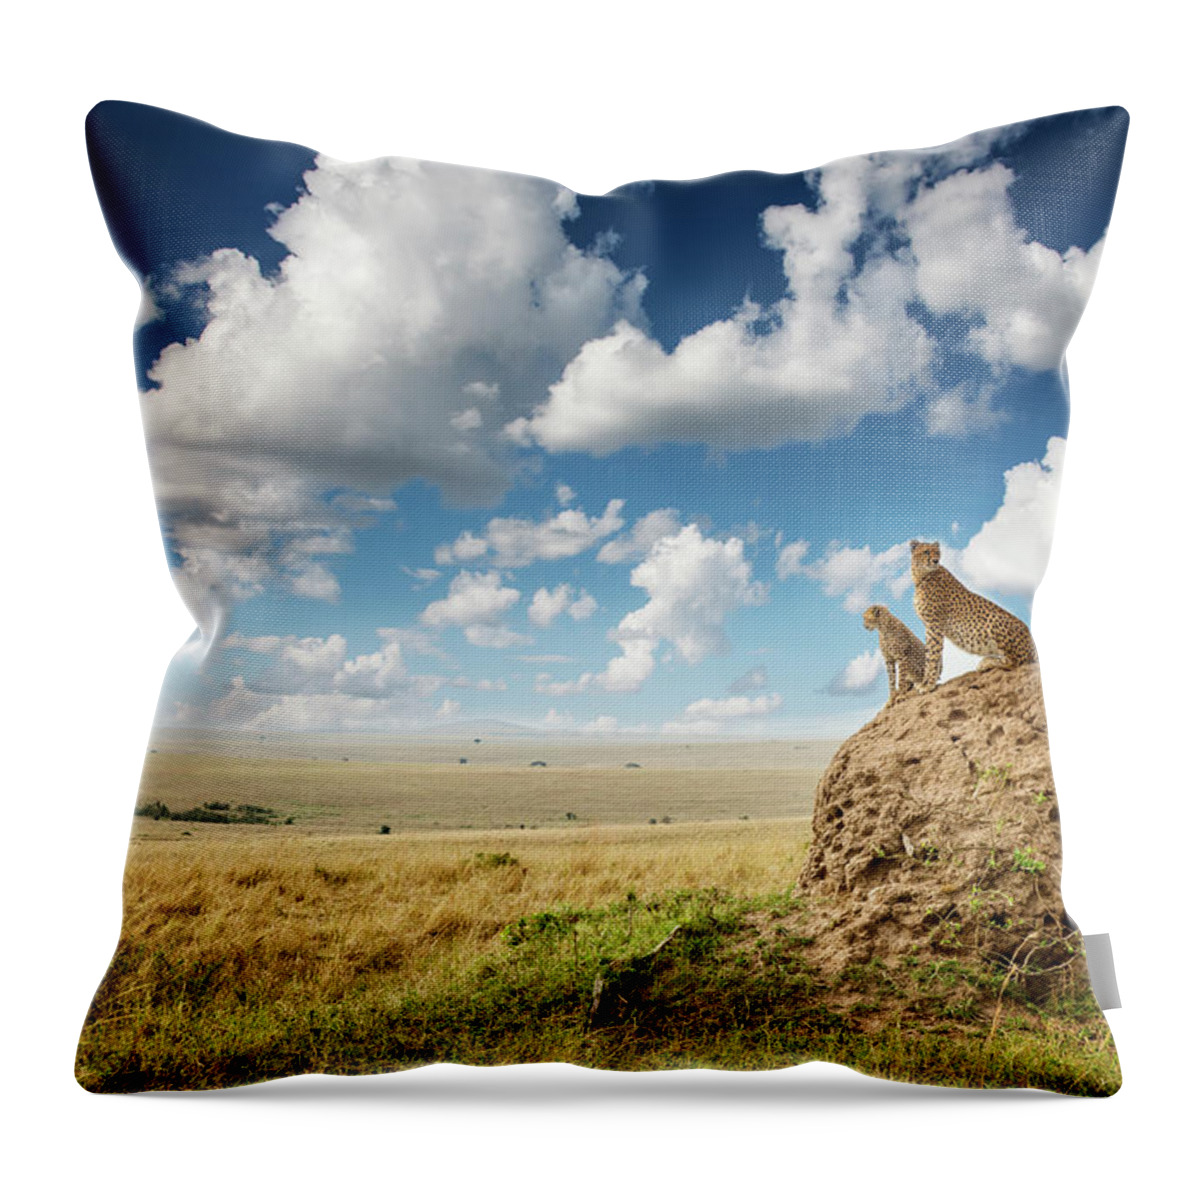 Scenics Throw Pillow featuring the photograph Cheetah And Cub Watching From A Mound by Mike Hill